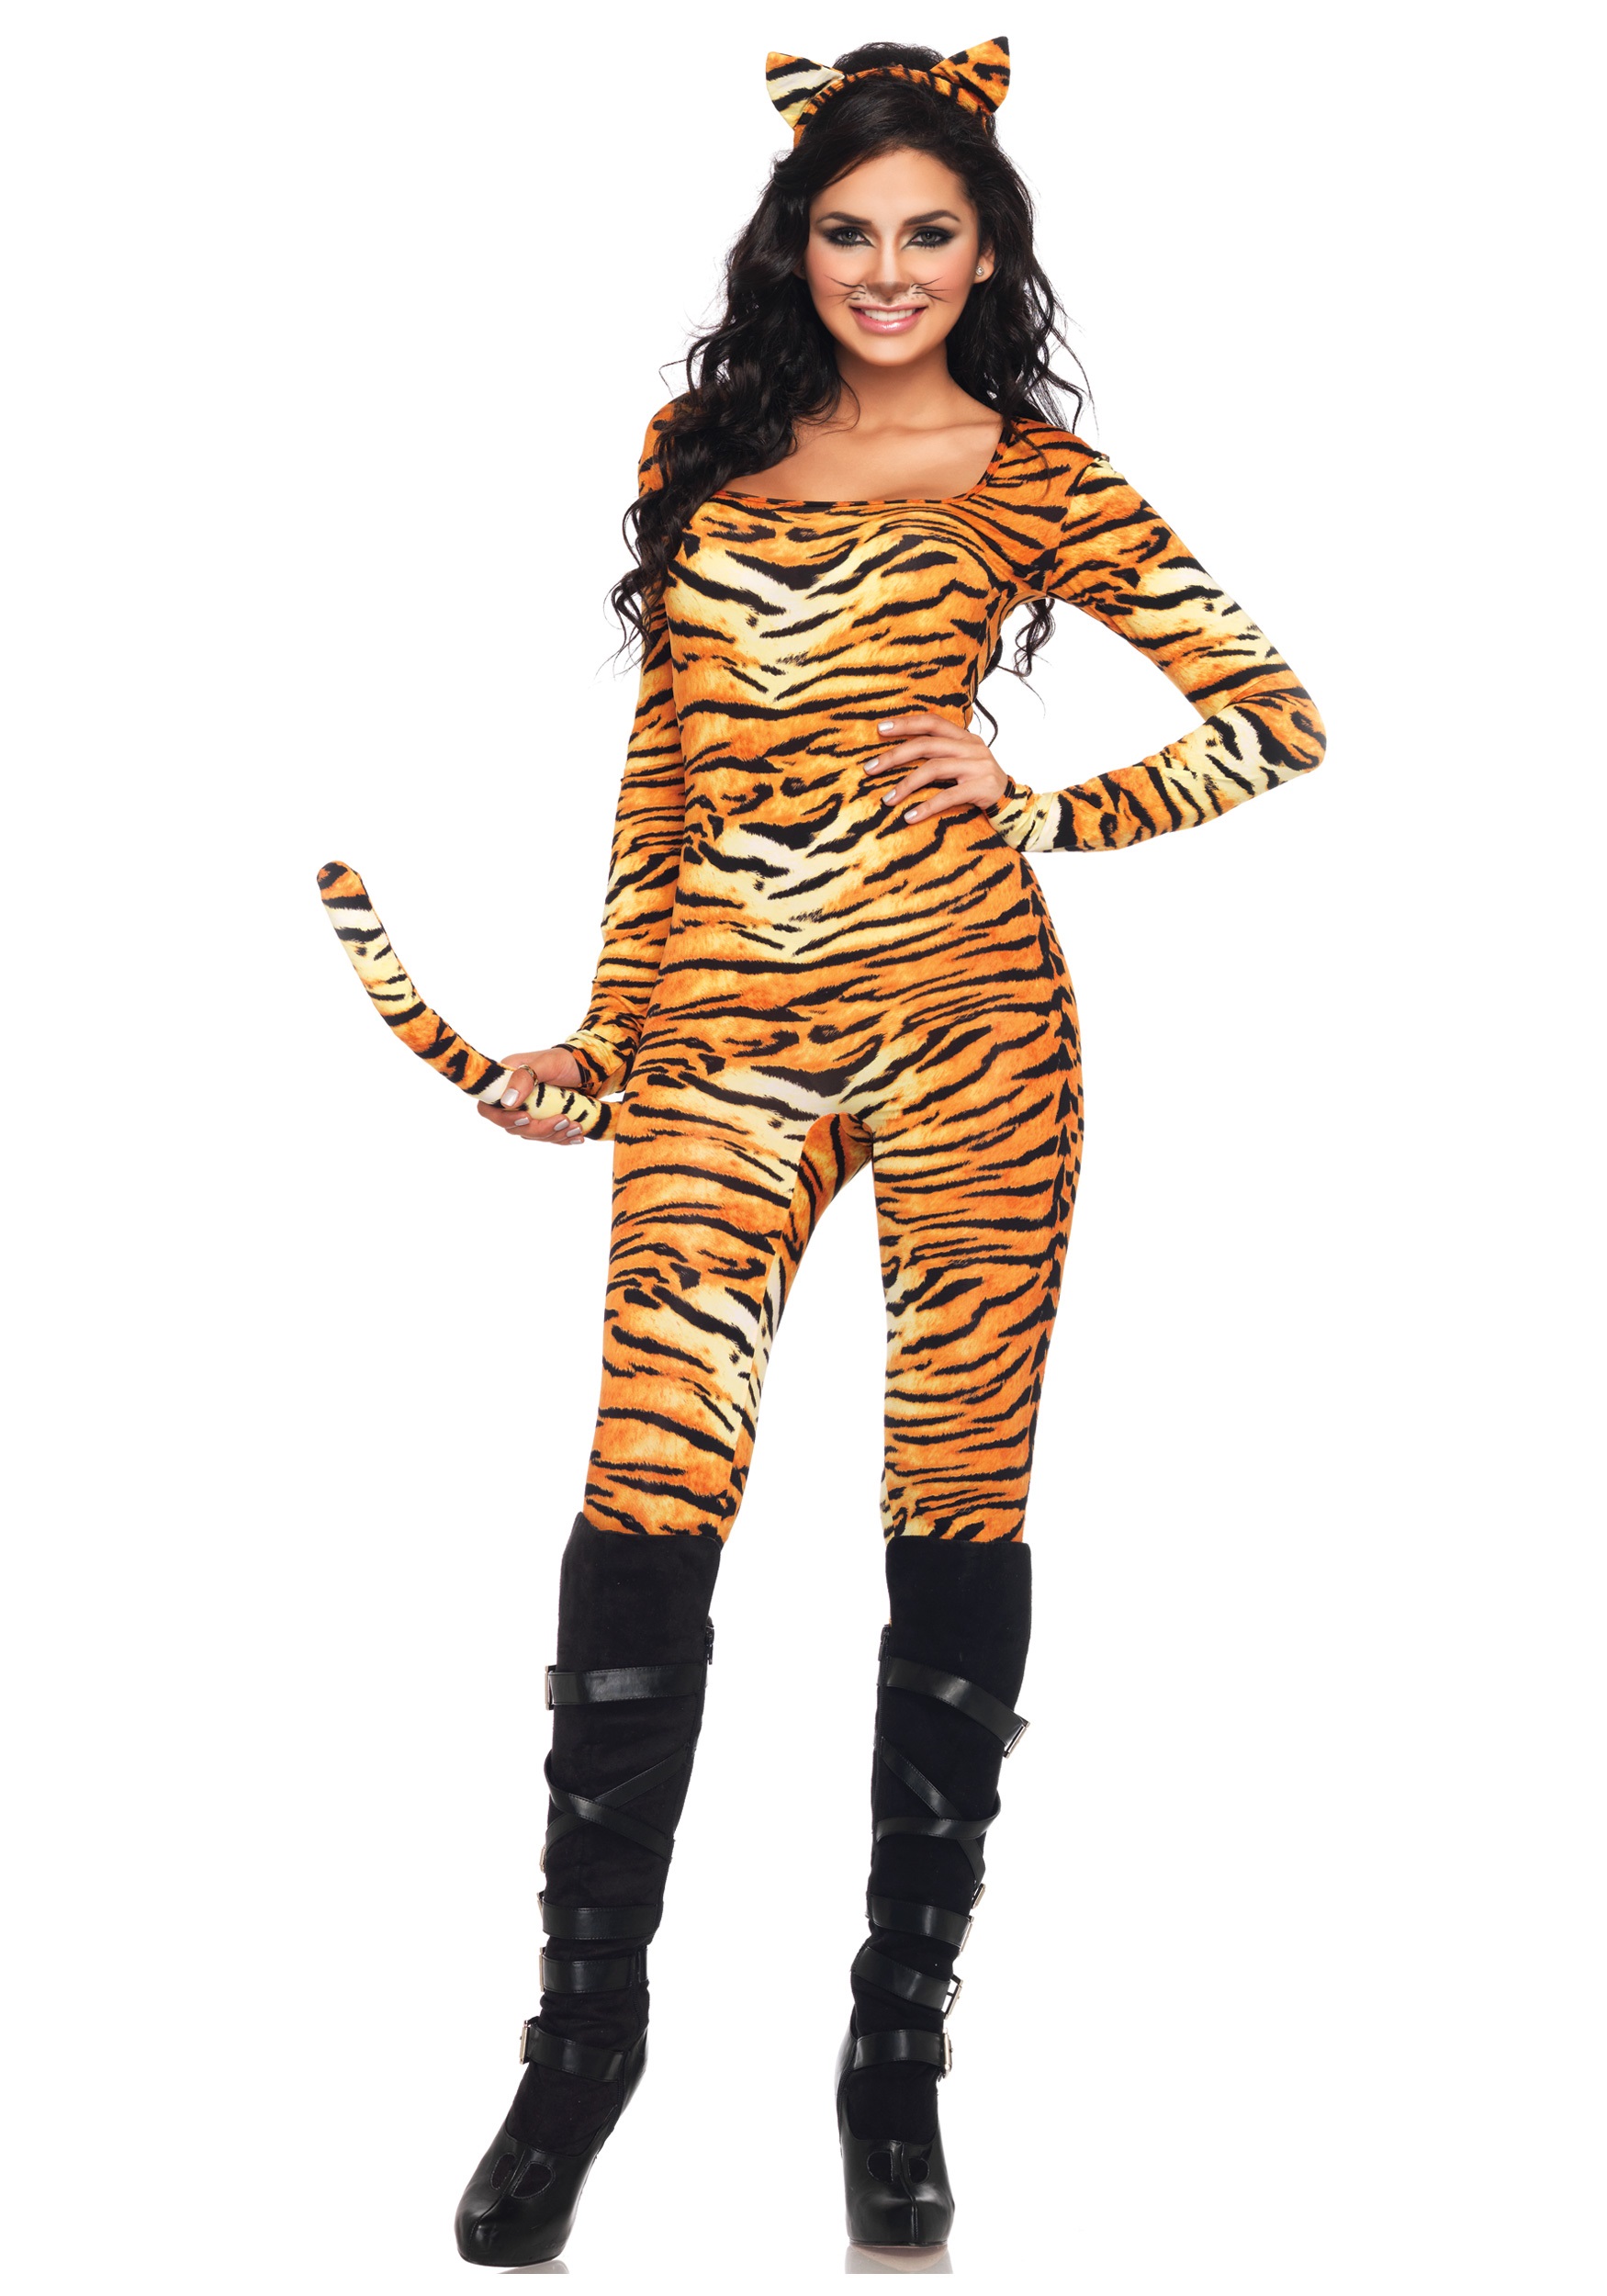 Sexy Wild Tiger Fancy Dress Costume For Adults